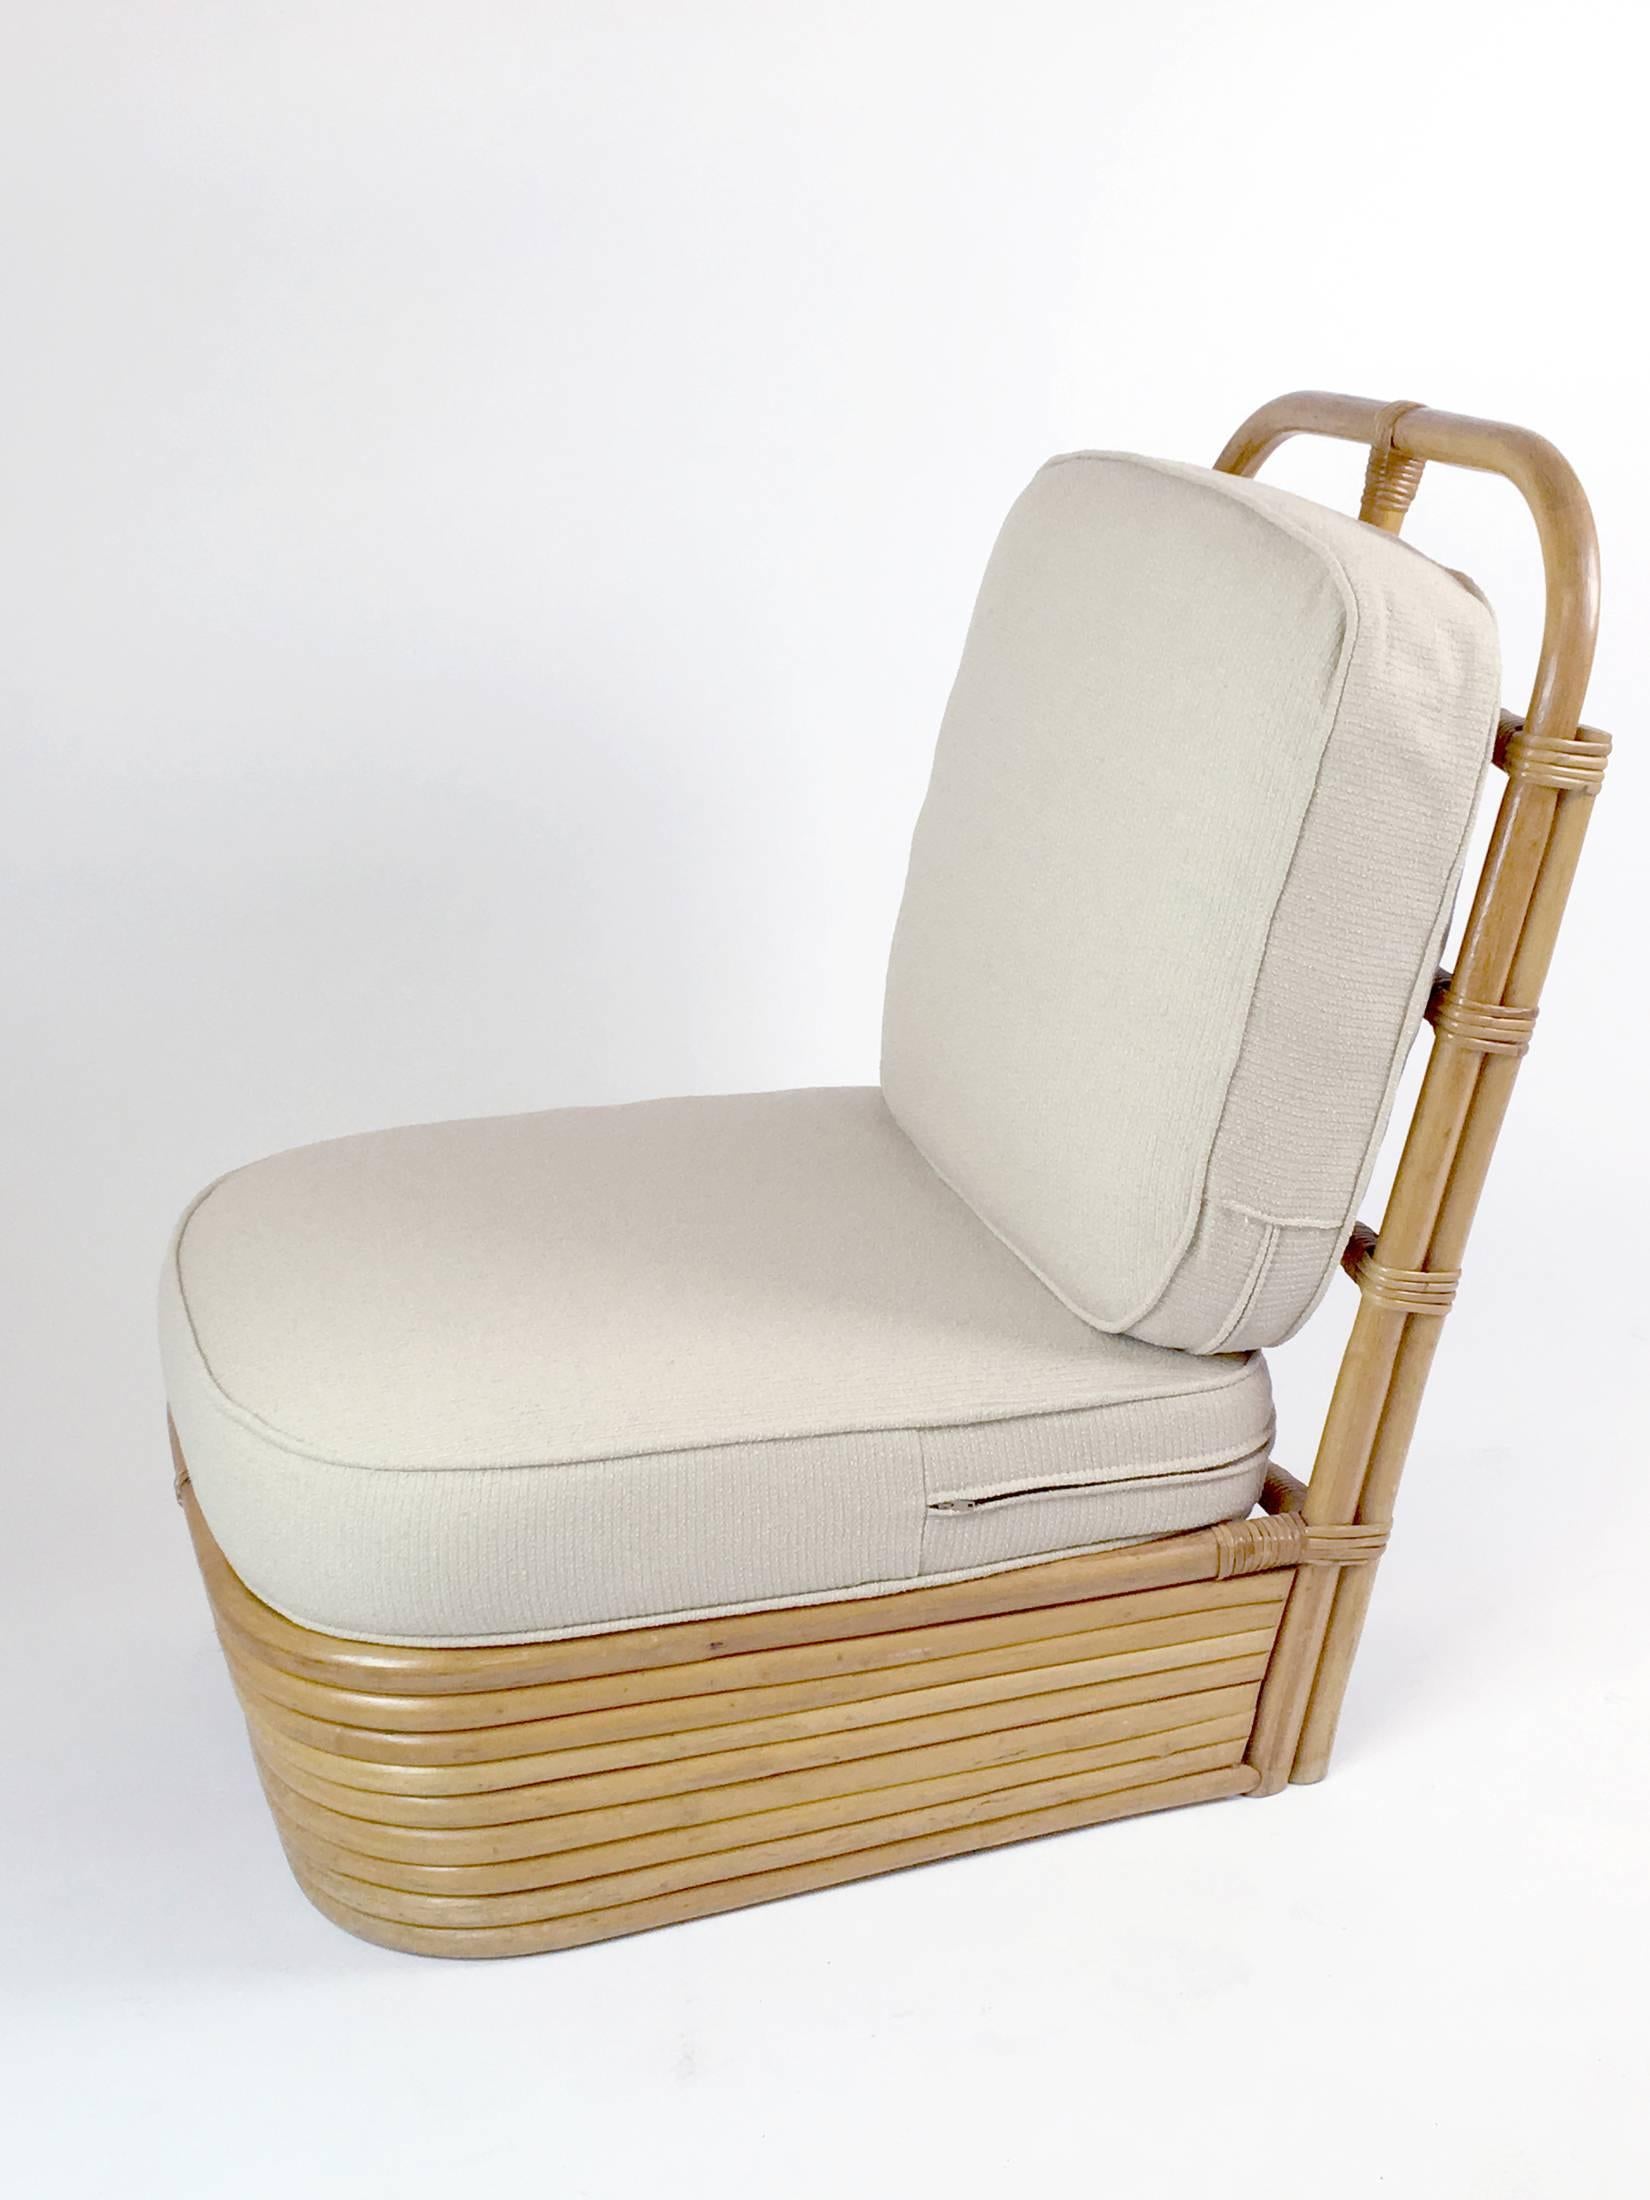 A pair of Paul Frankl style slipper chairs by Tochiku Industries in Japan, circa 1950. New cushions in off-white linen. Art Deco / Mid-Century Modern style.
           